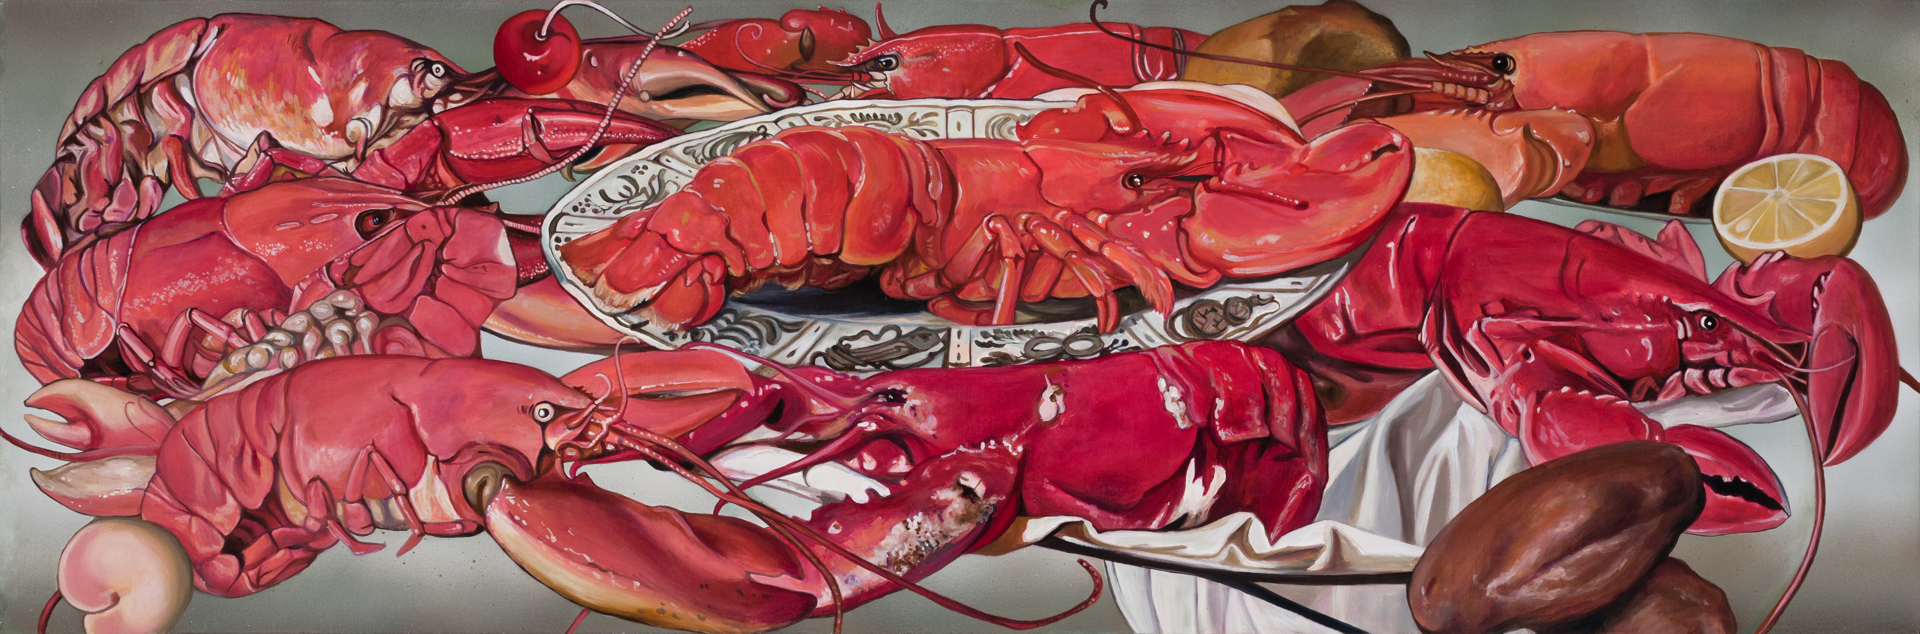 My Lobsters by Melissa Furness